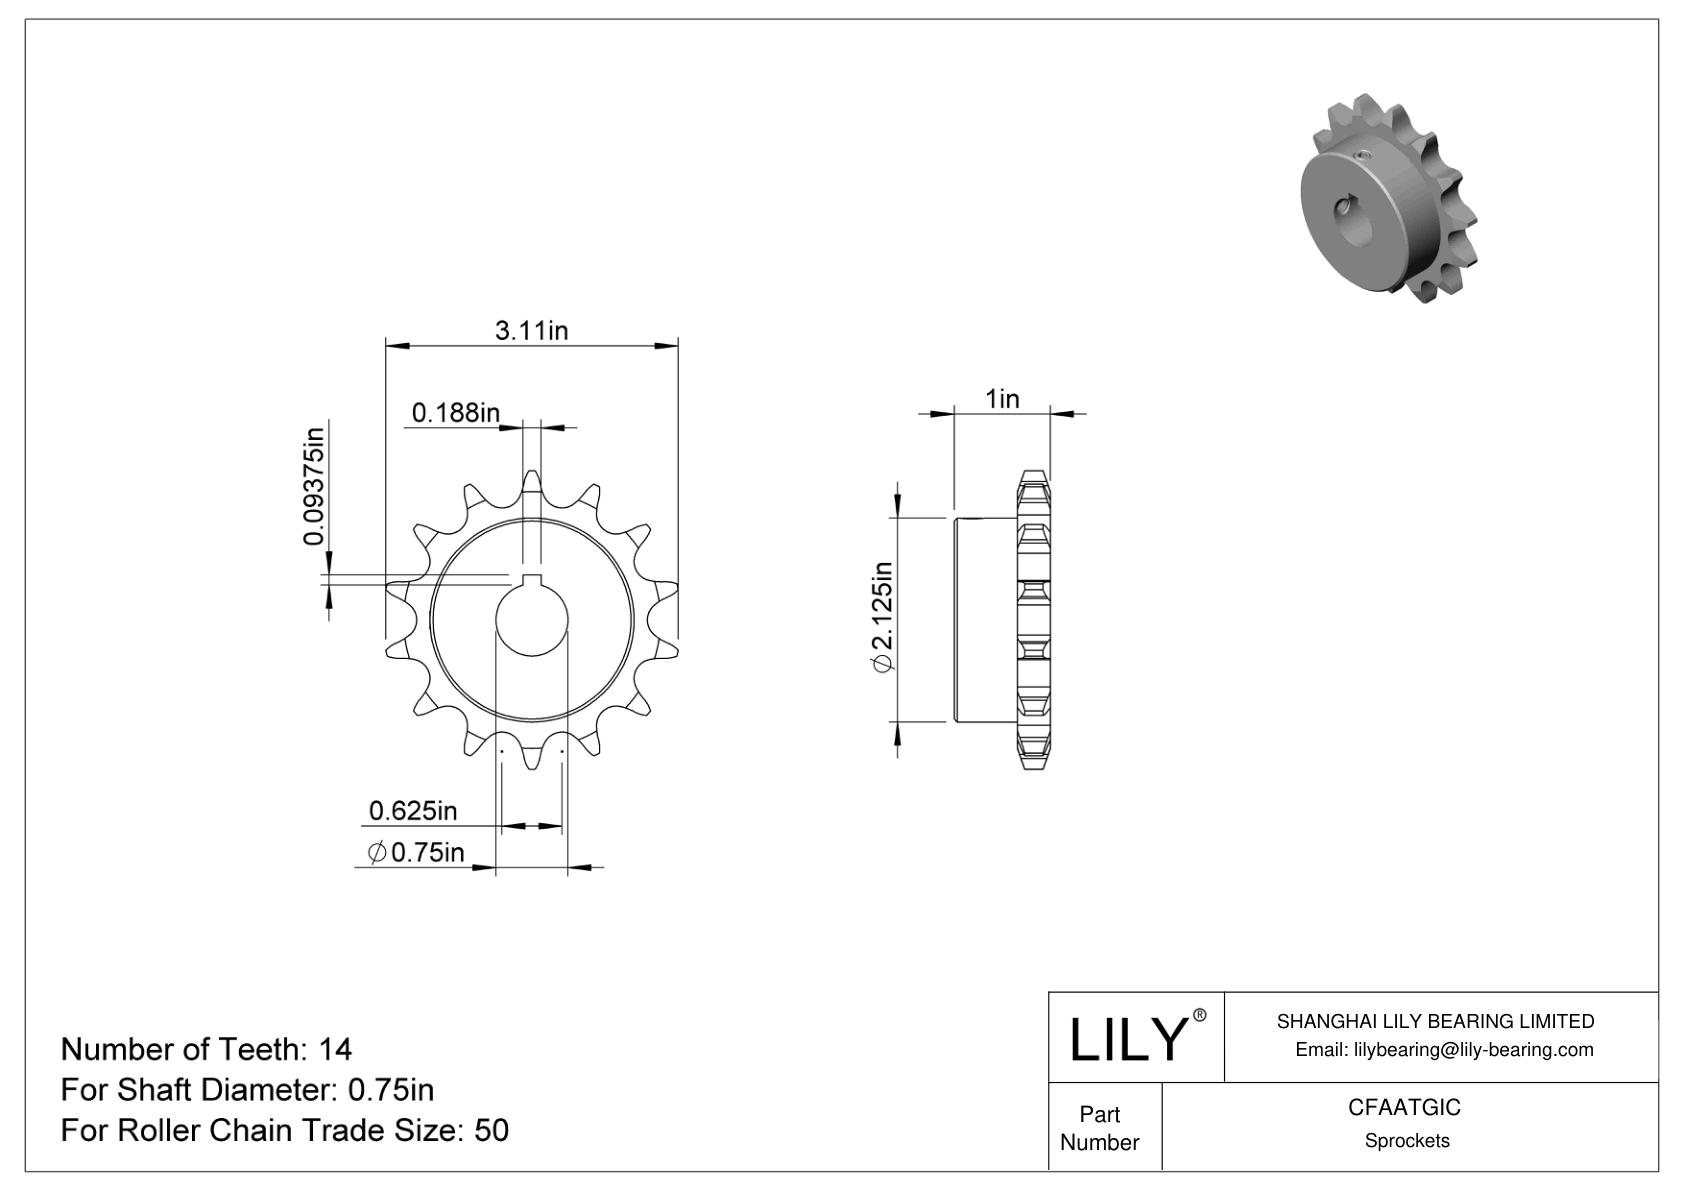 CFAATGIC Wear-Resistant Sprockets for ANSI Roller Chain cad drawing